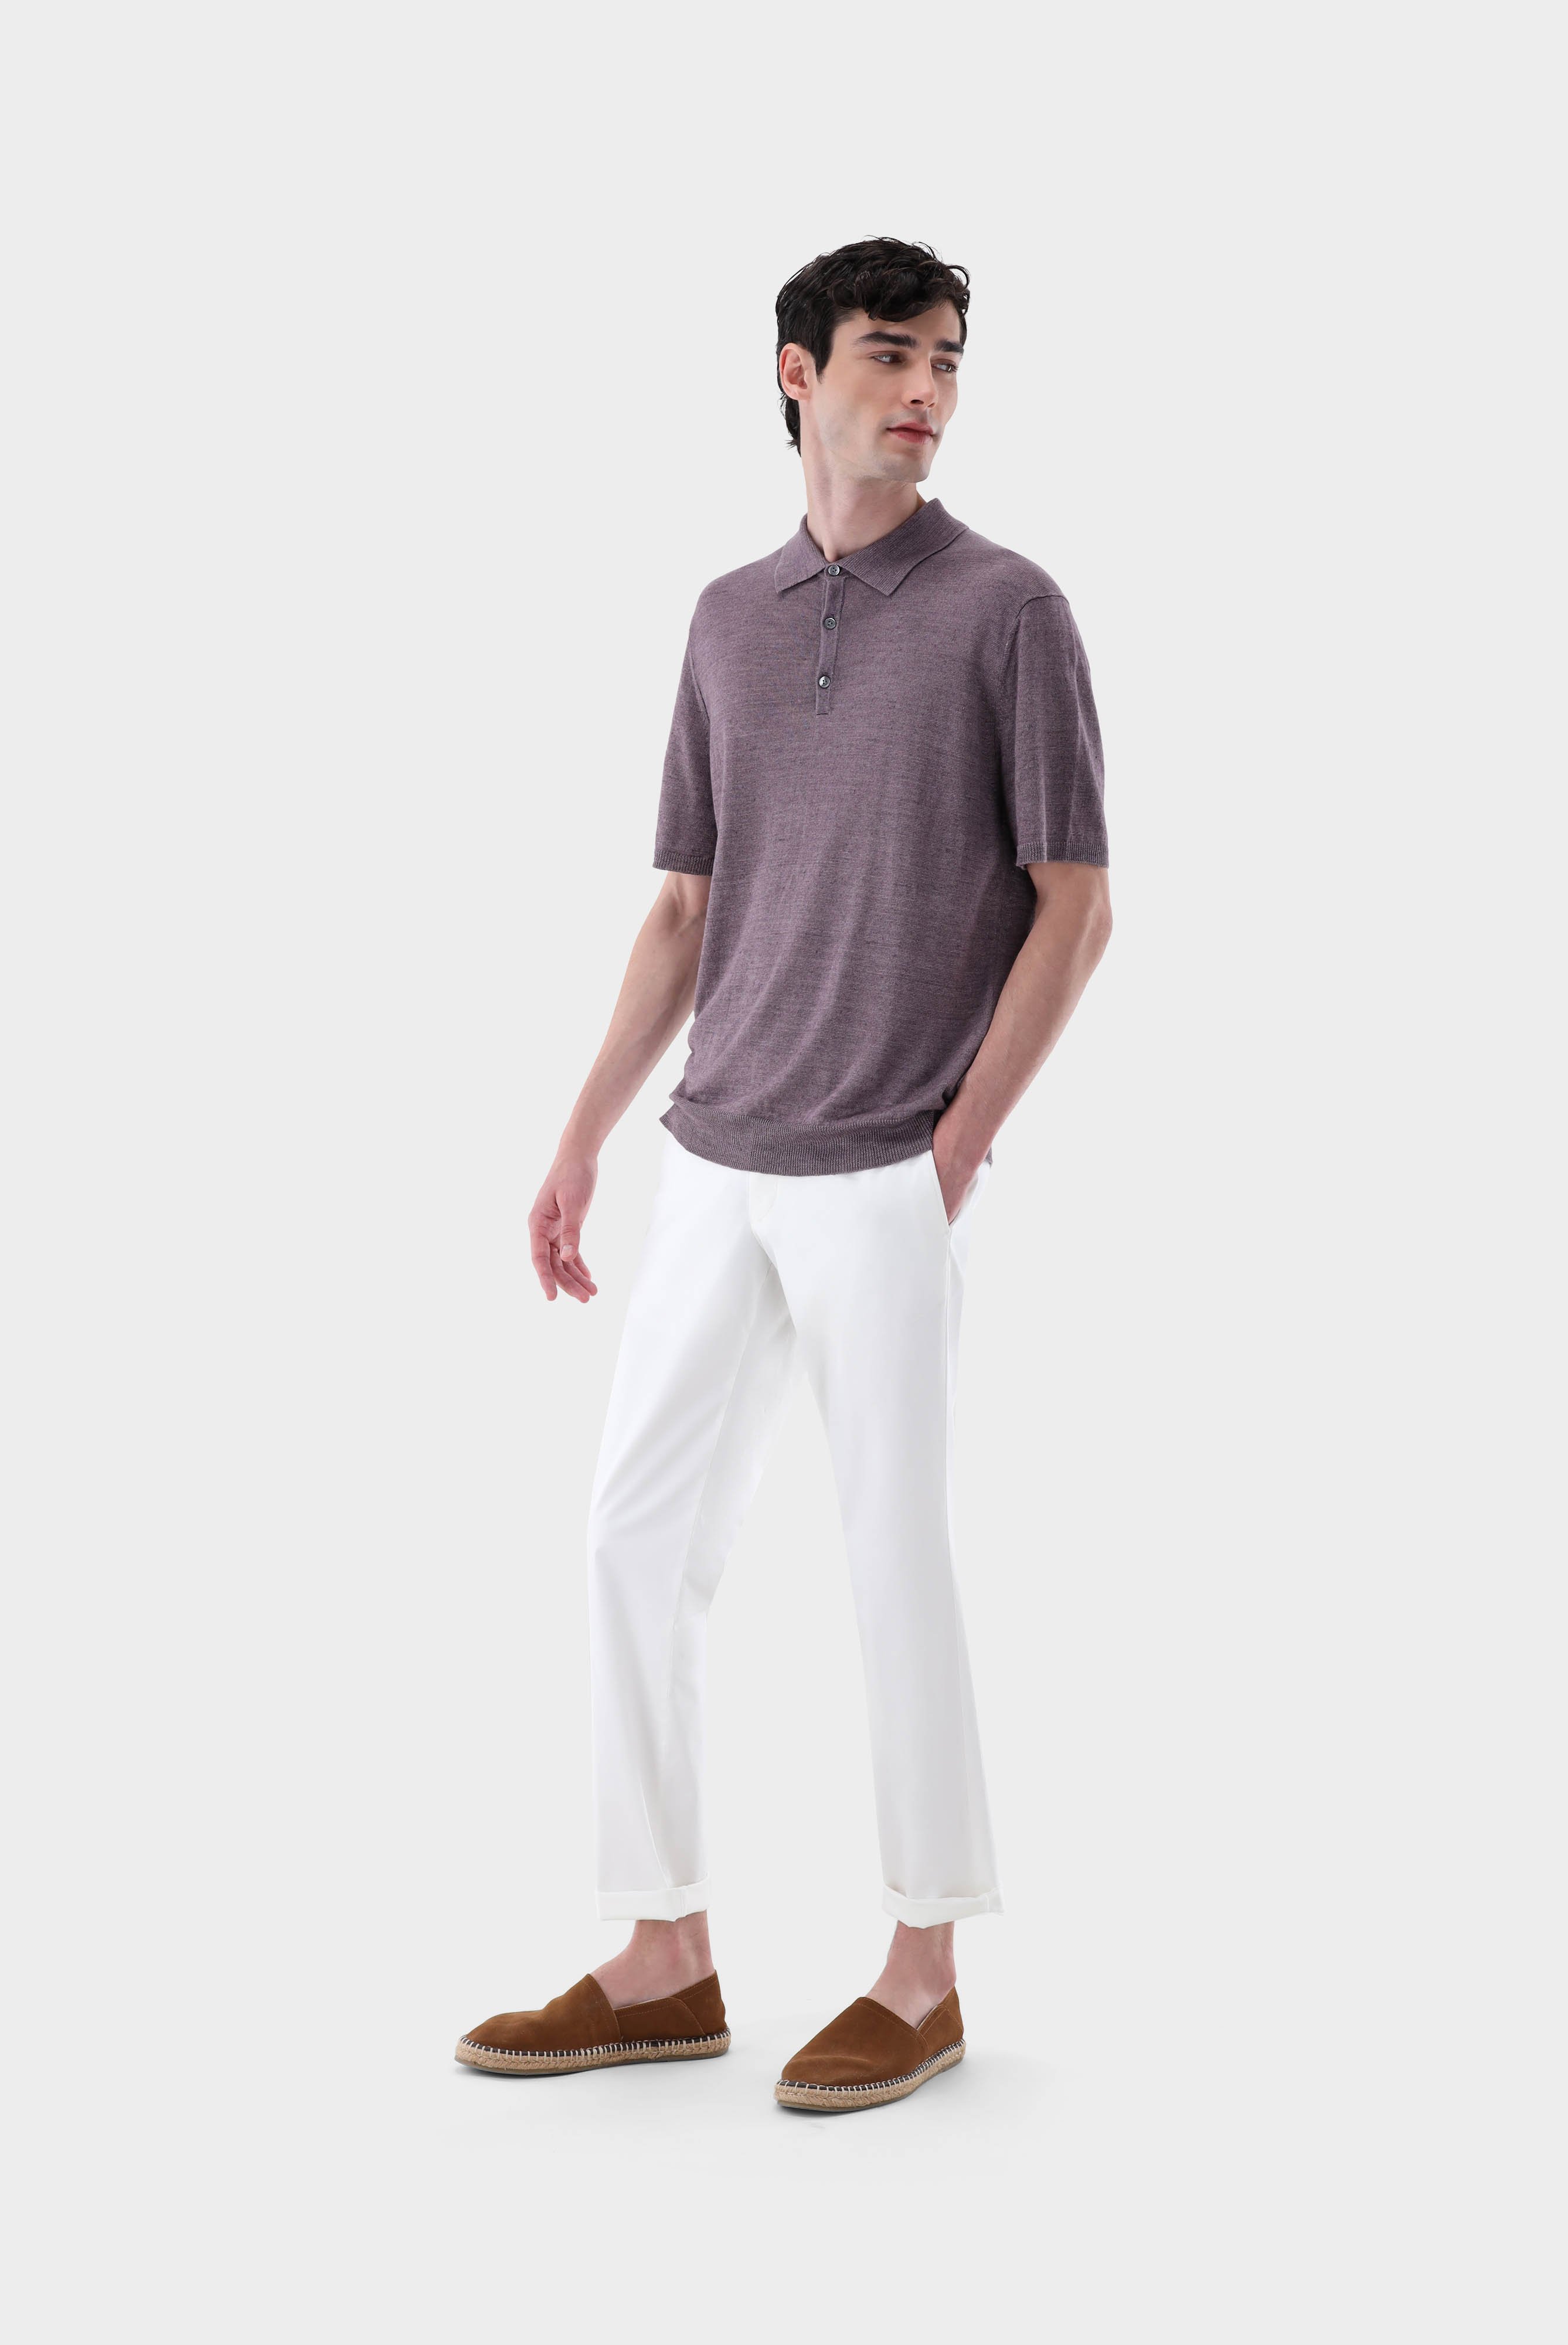 Poloshirts+Knit Polo in Linen+82.8603..S00169.680.L